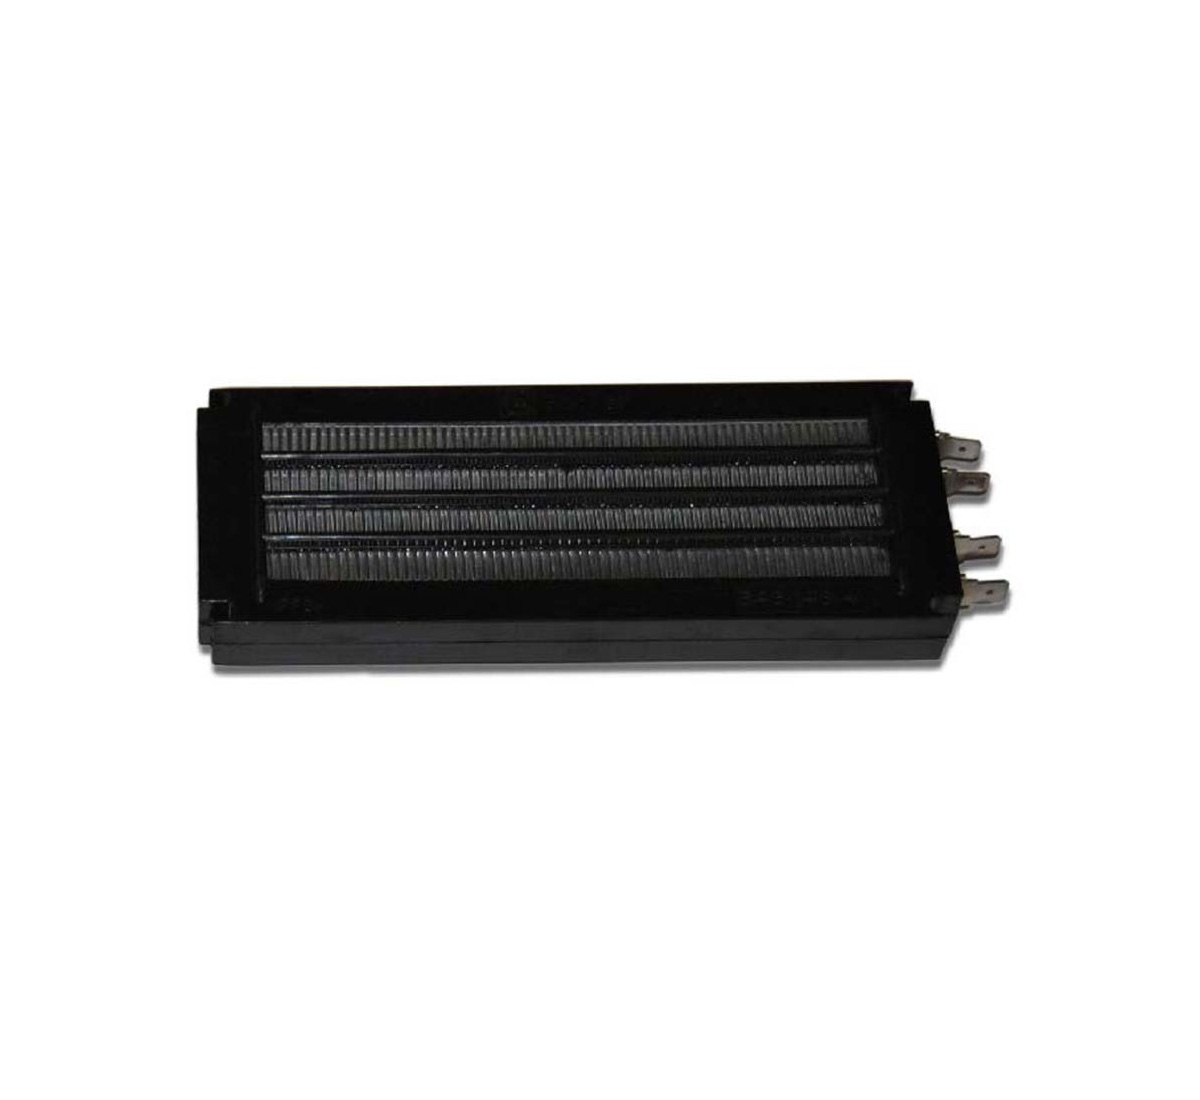 A picture of a PTC heating element, type B46-148-4